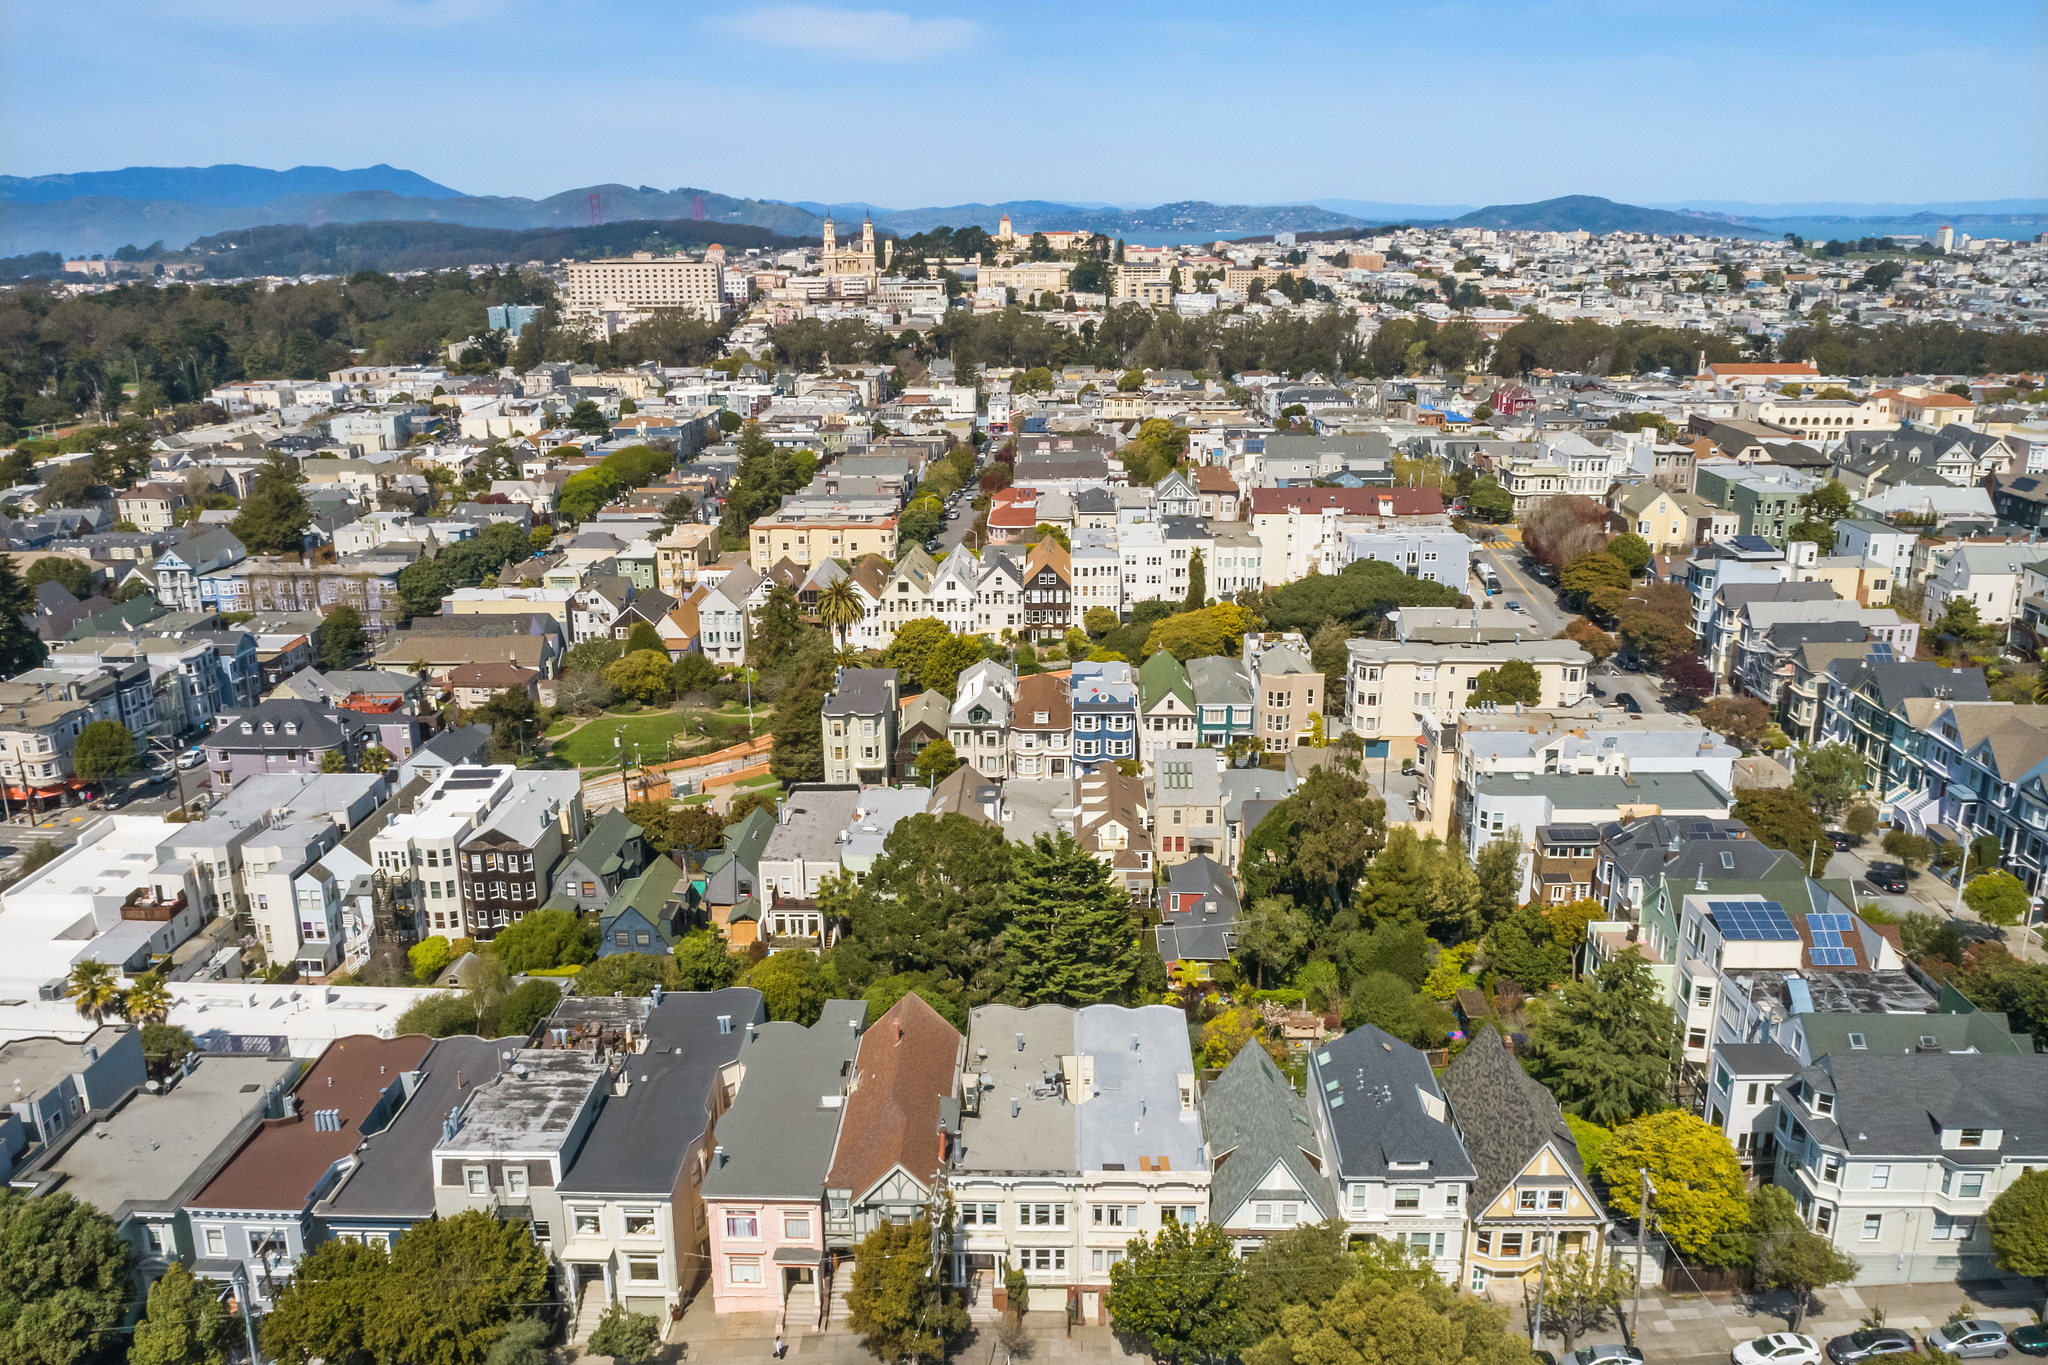 Property Photo: Aerial view of 36 Parnassus Avenue, showing from Cole Valley to the Bay